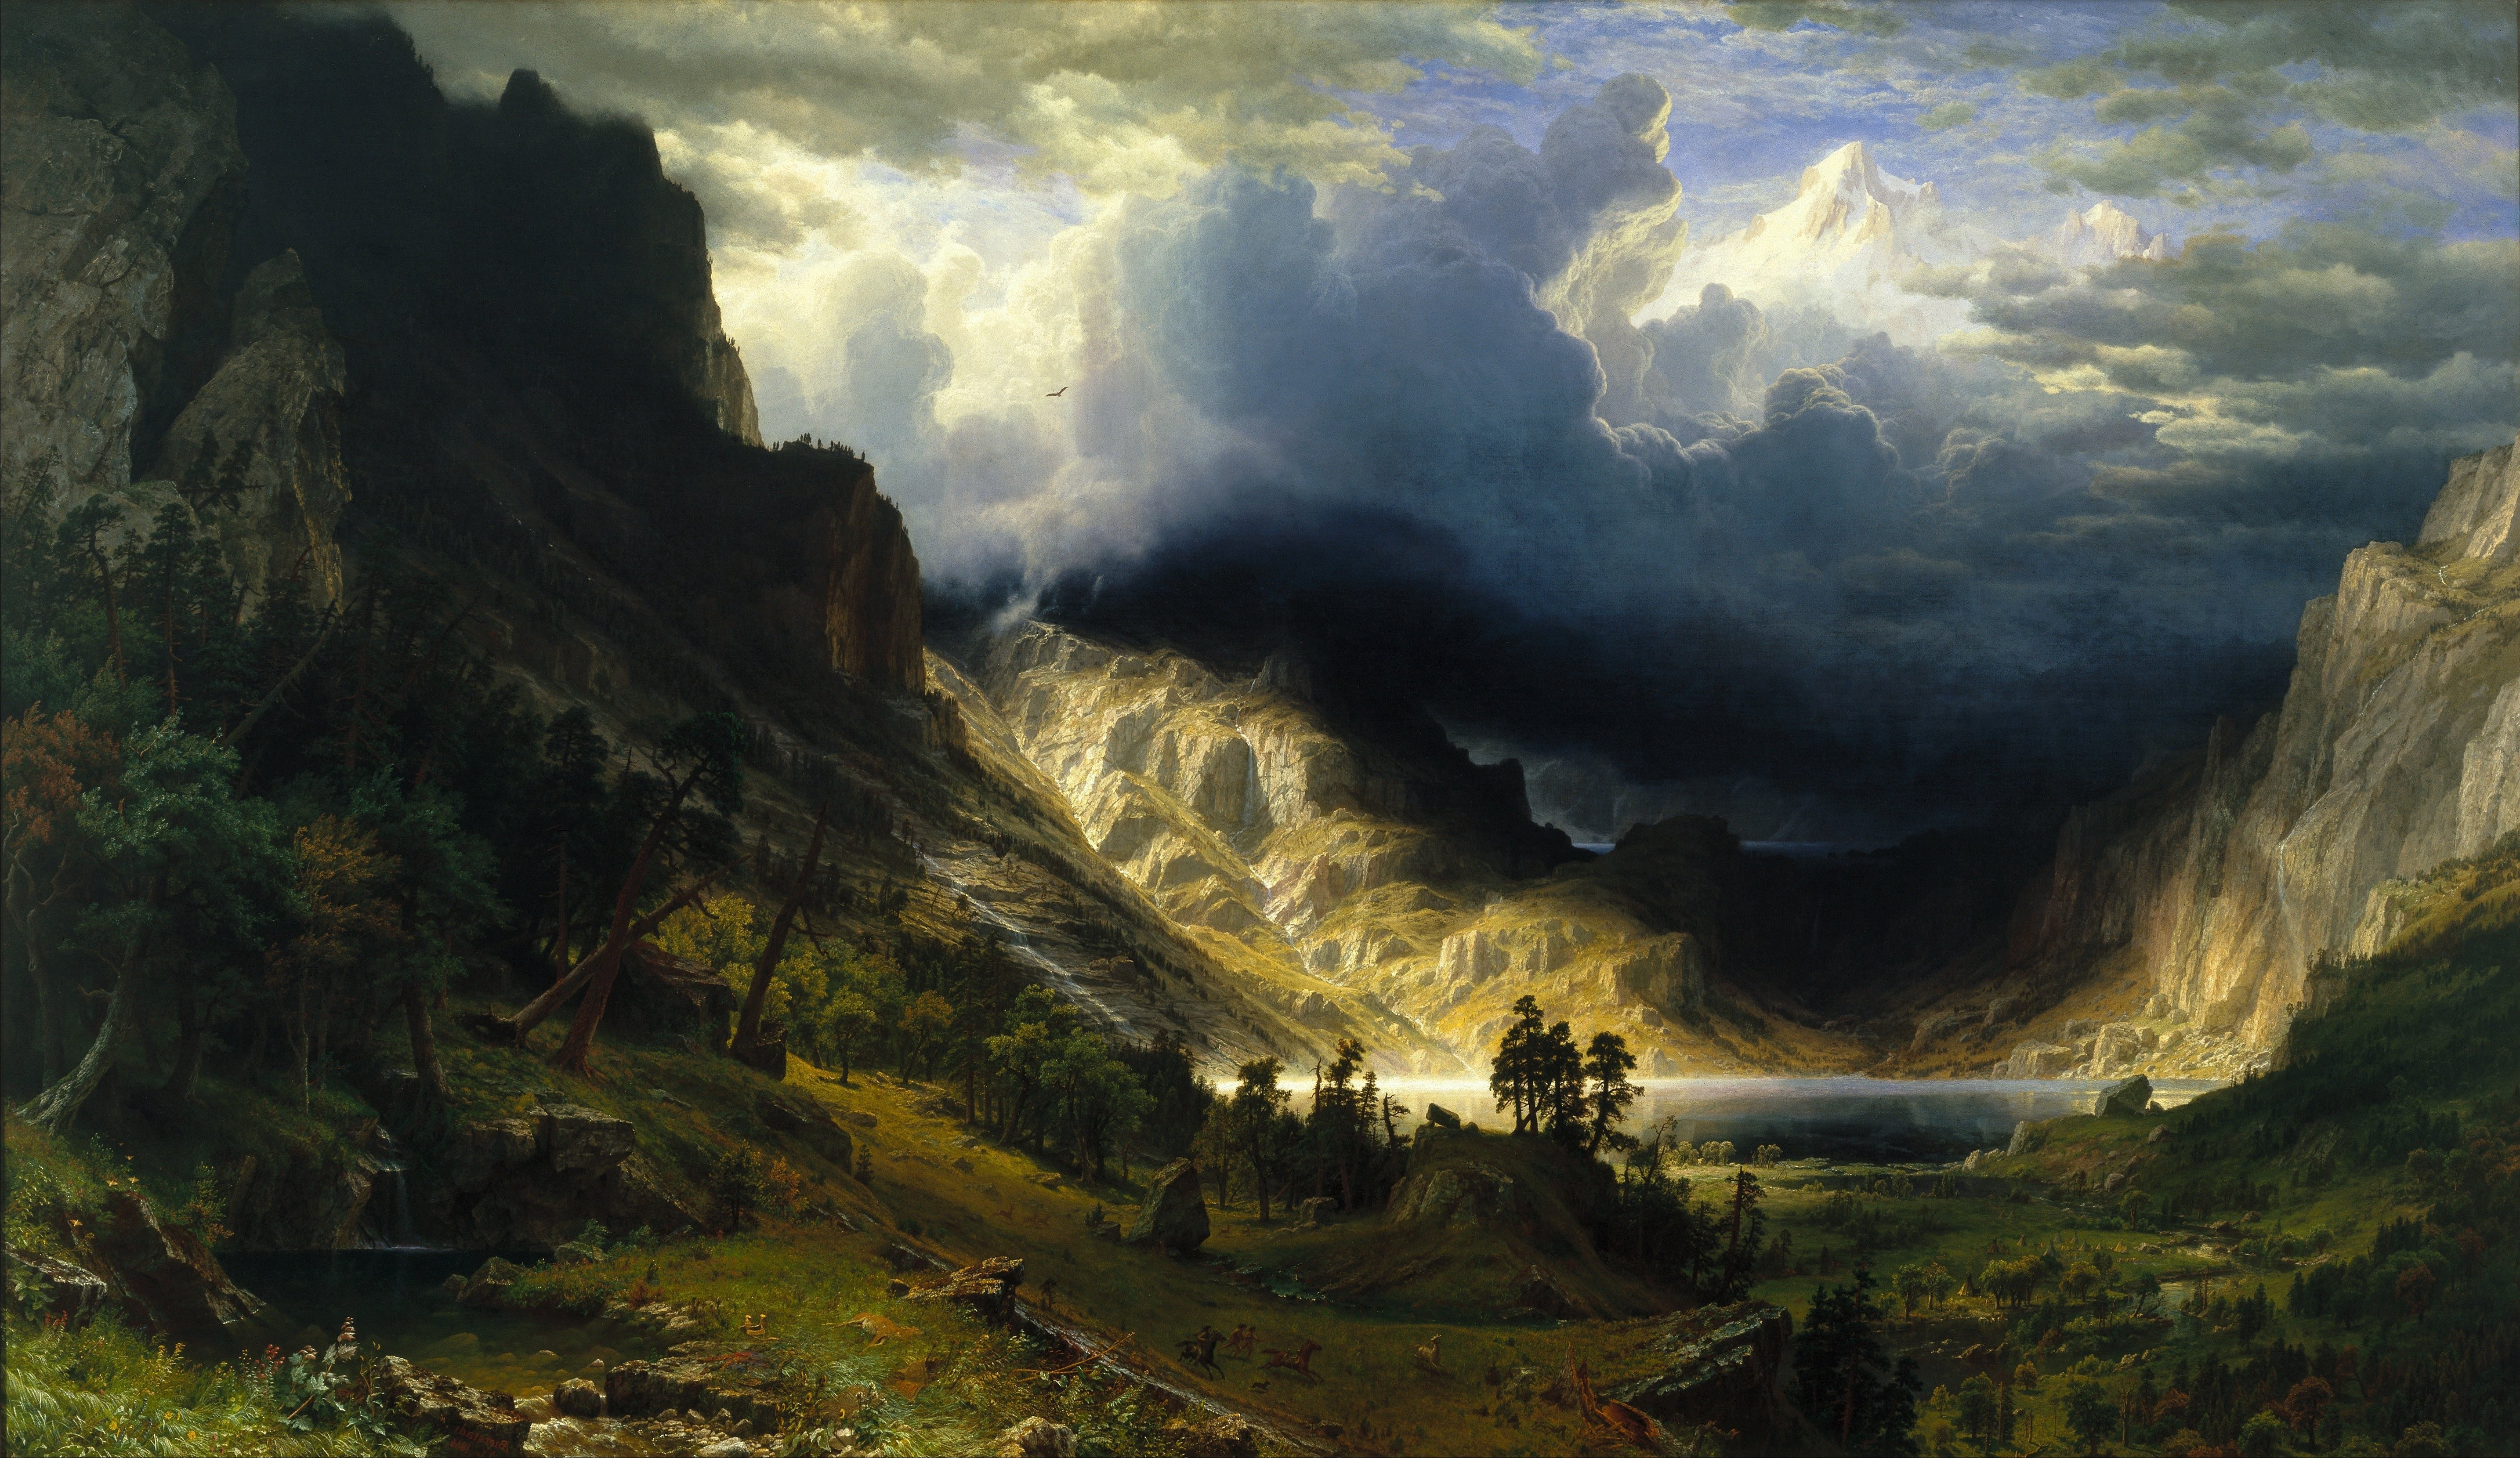 Albert Bierstadt, Nature, Landscape, Mountains, Fantasy Art, Painting, A Storm In The Rocky Mountains Wallpaper